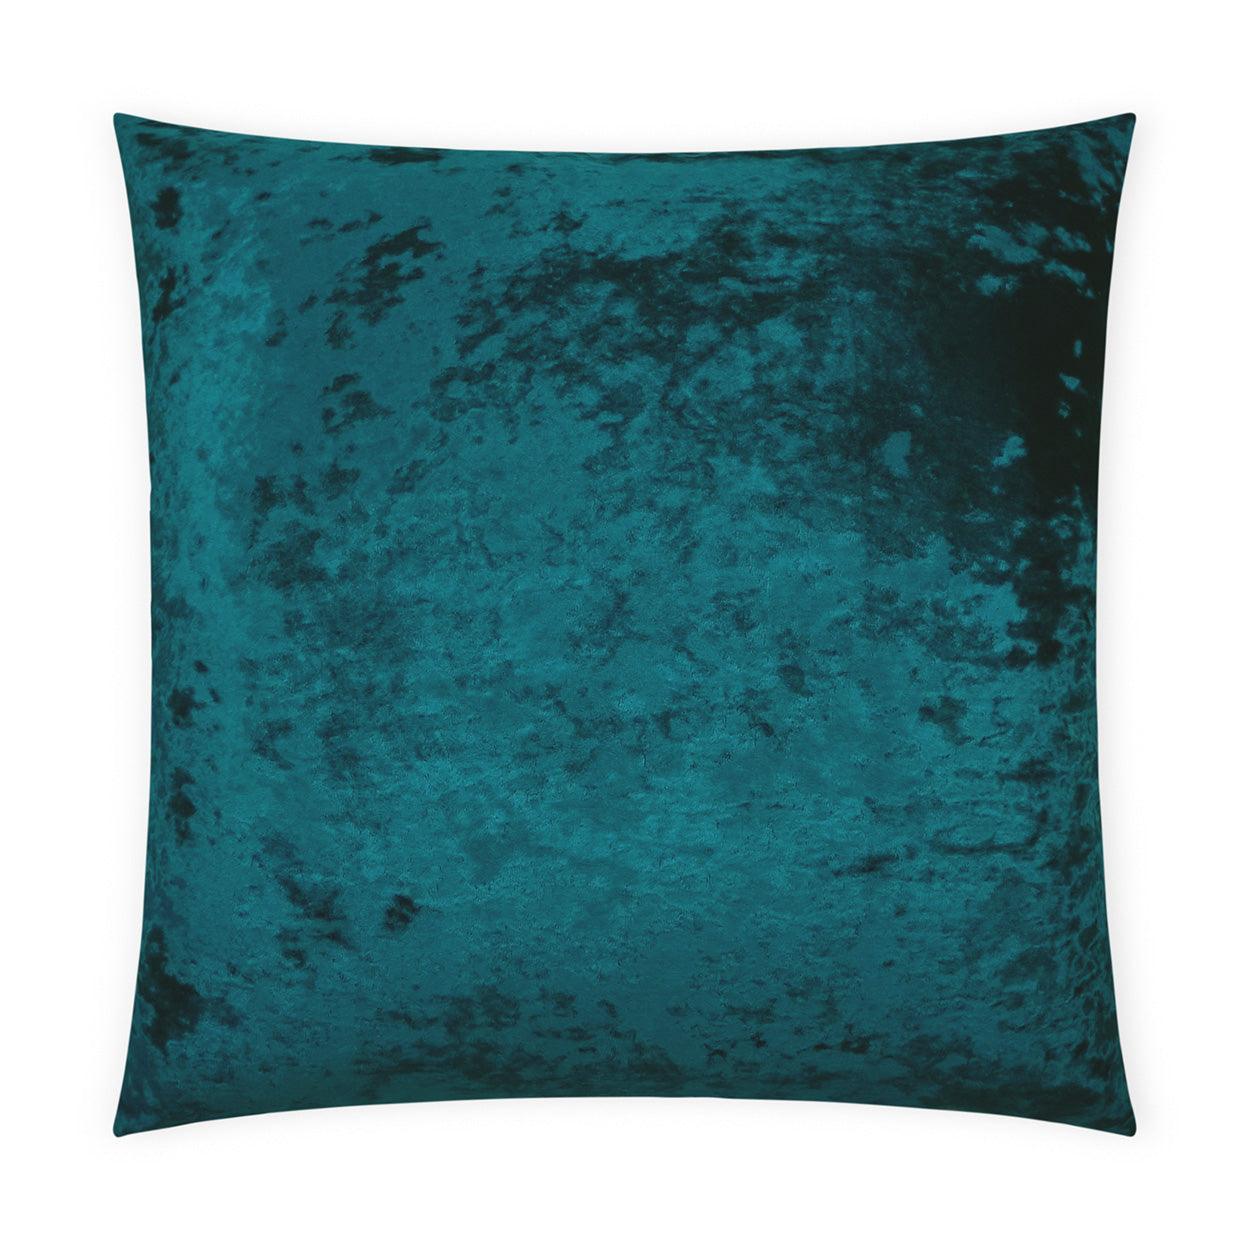 Ballet Pacific Solid Turquoise Teal Large Throw Pillow With Insert - Uptown Sebastian